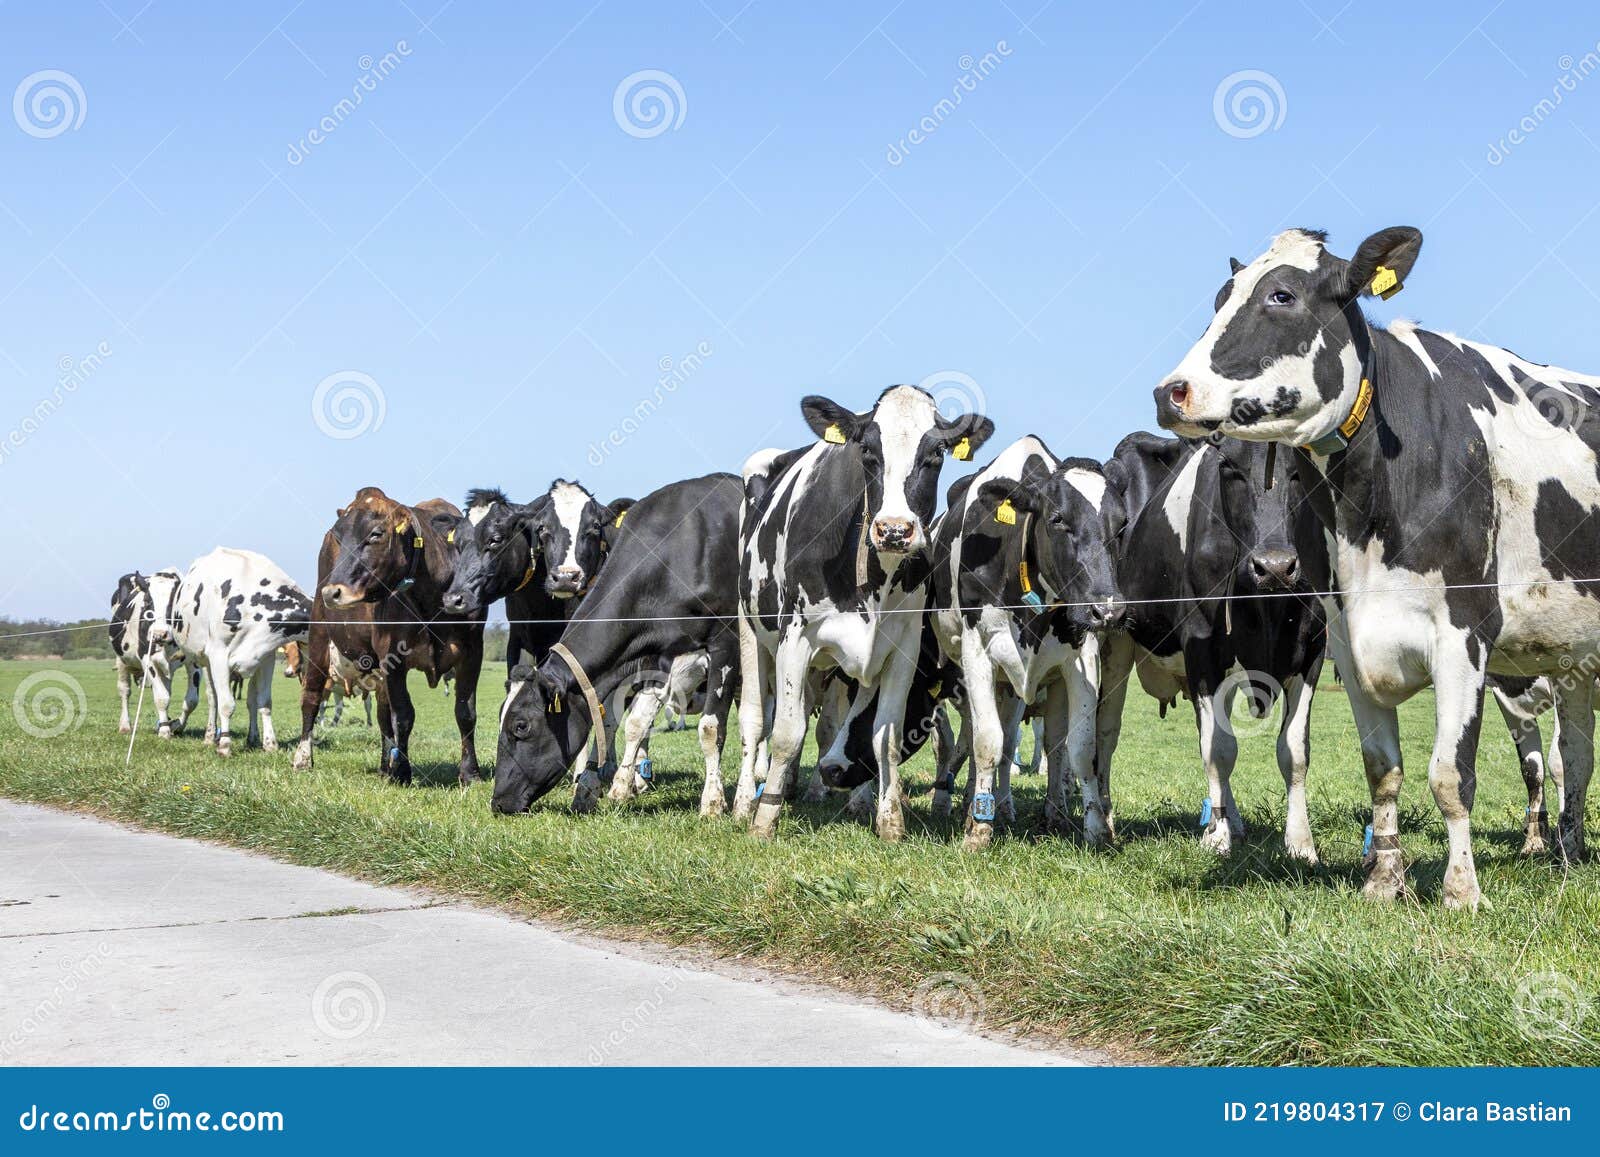 Group of Cows Waiting Behind a Line Fence, Together Standing in a Green ...